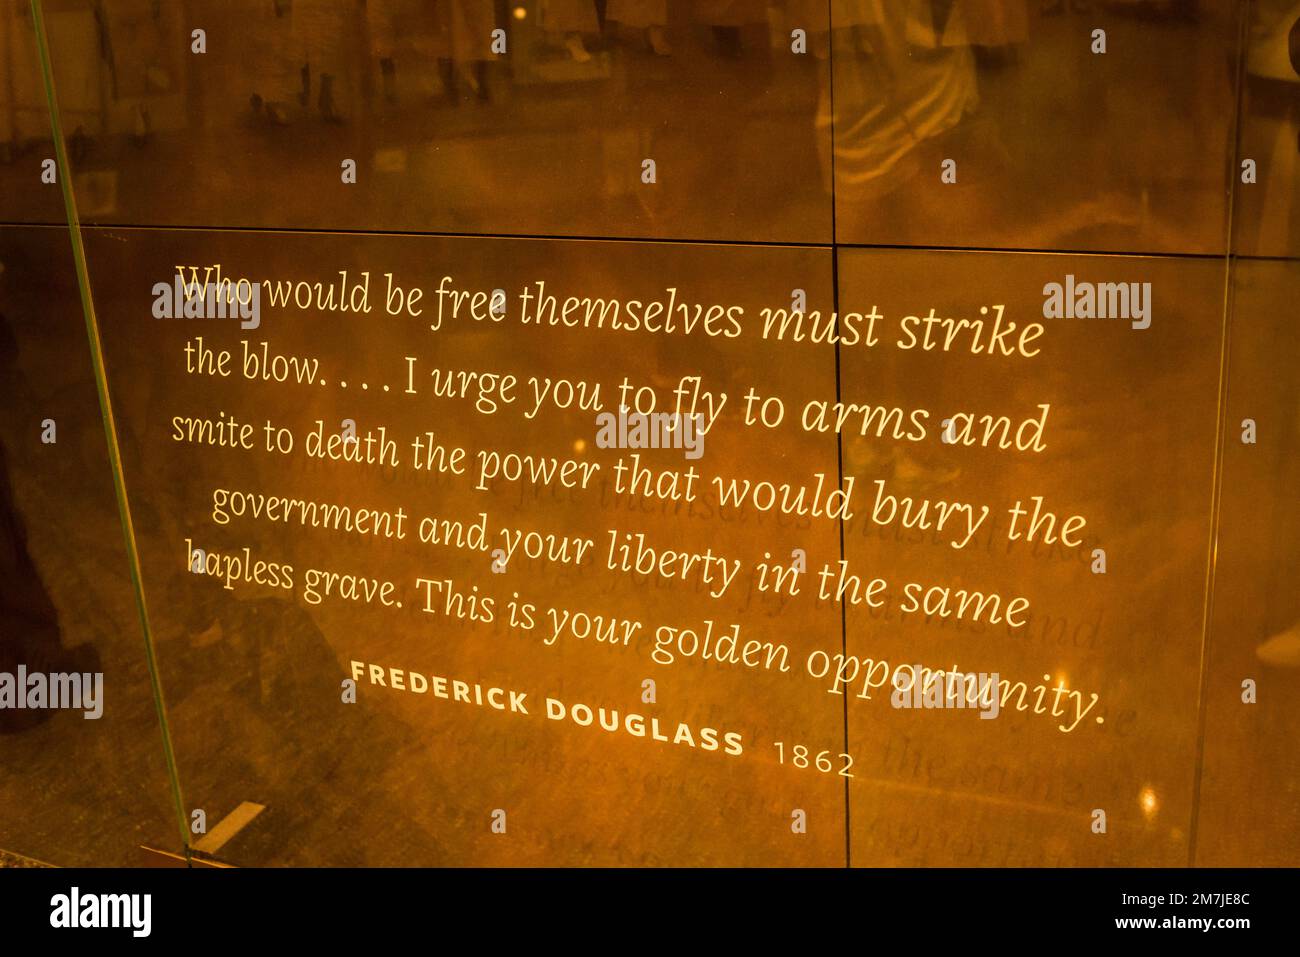 Frederick Douglass quote, National Museum of African American History and Culture,, Washington, D.C., USA Stock Photo